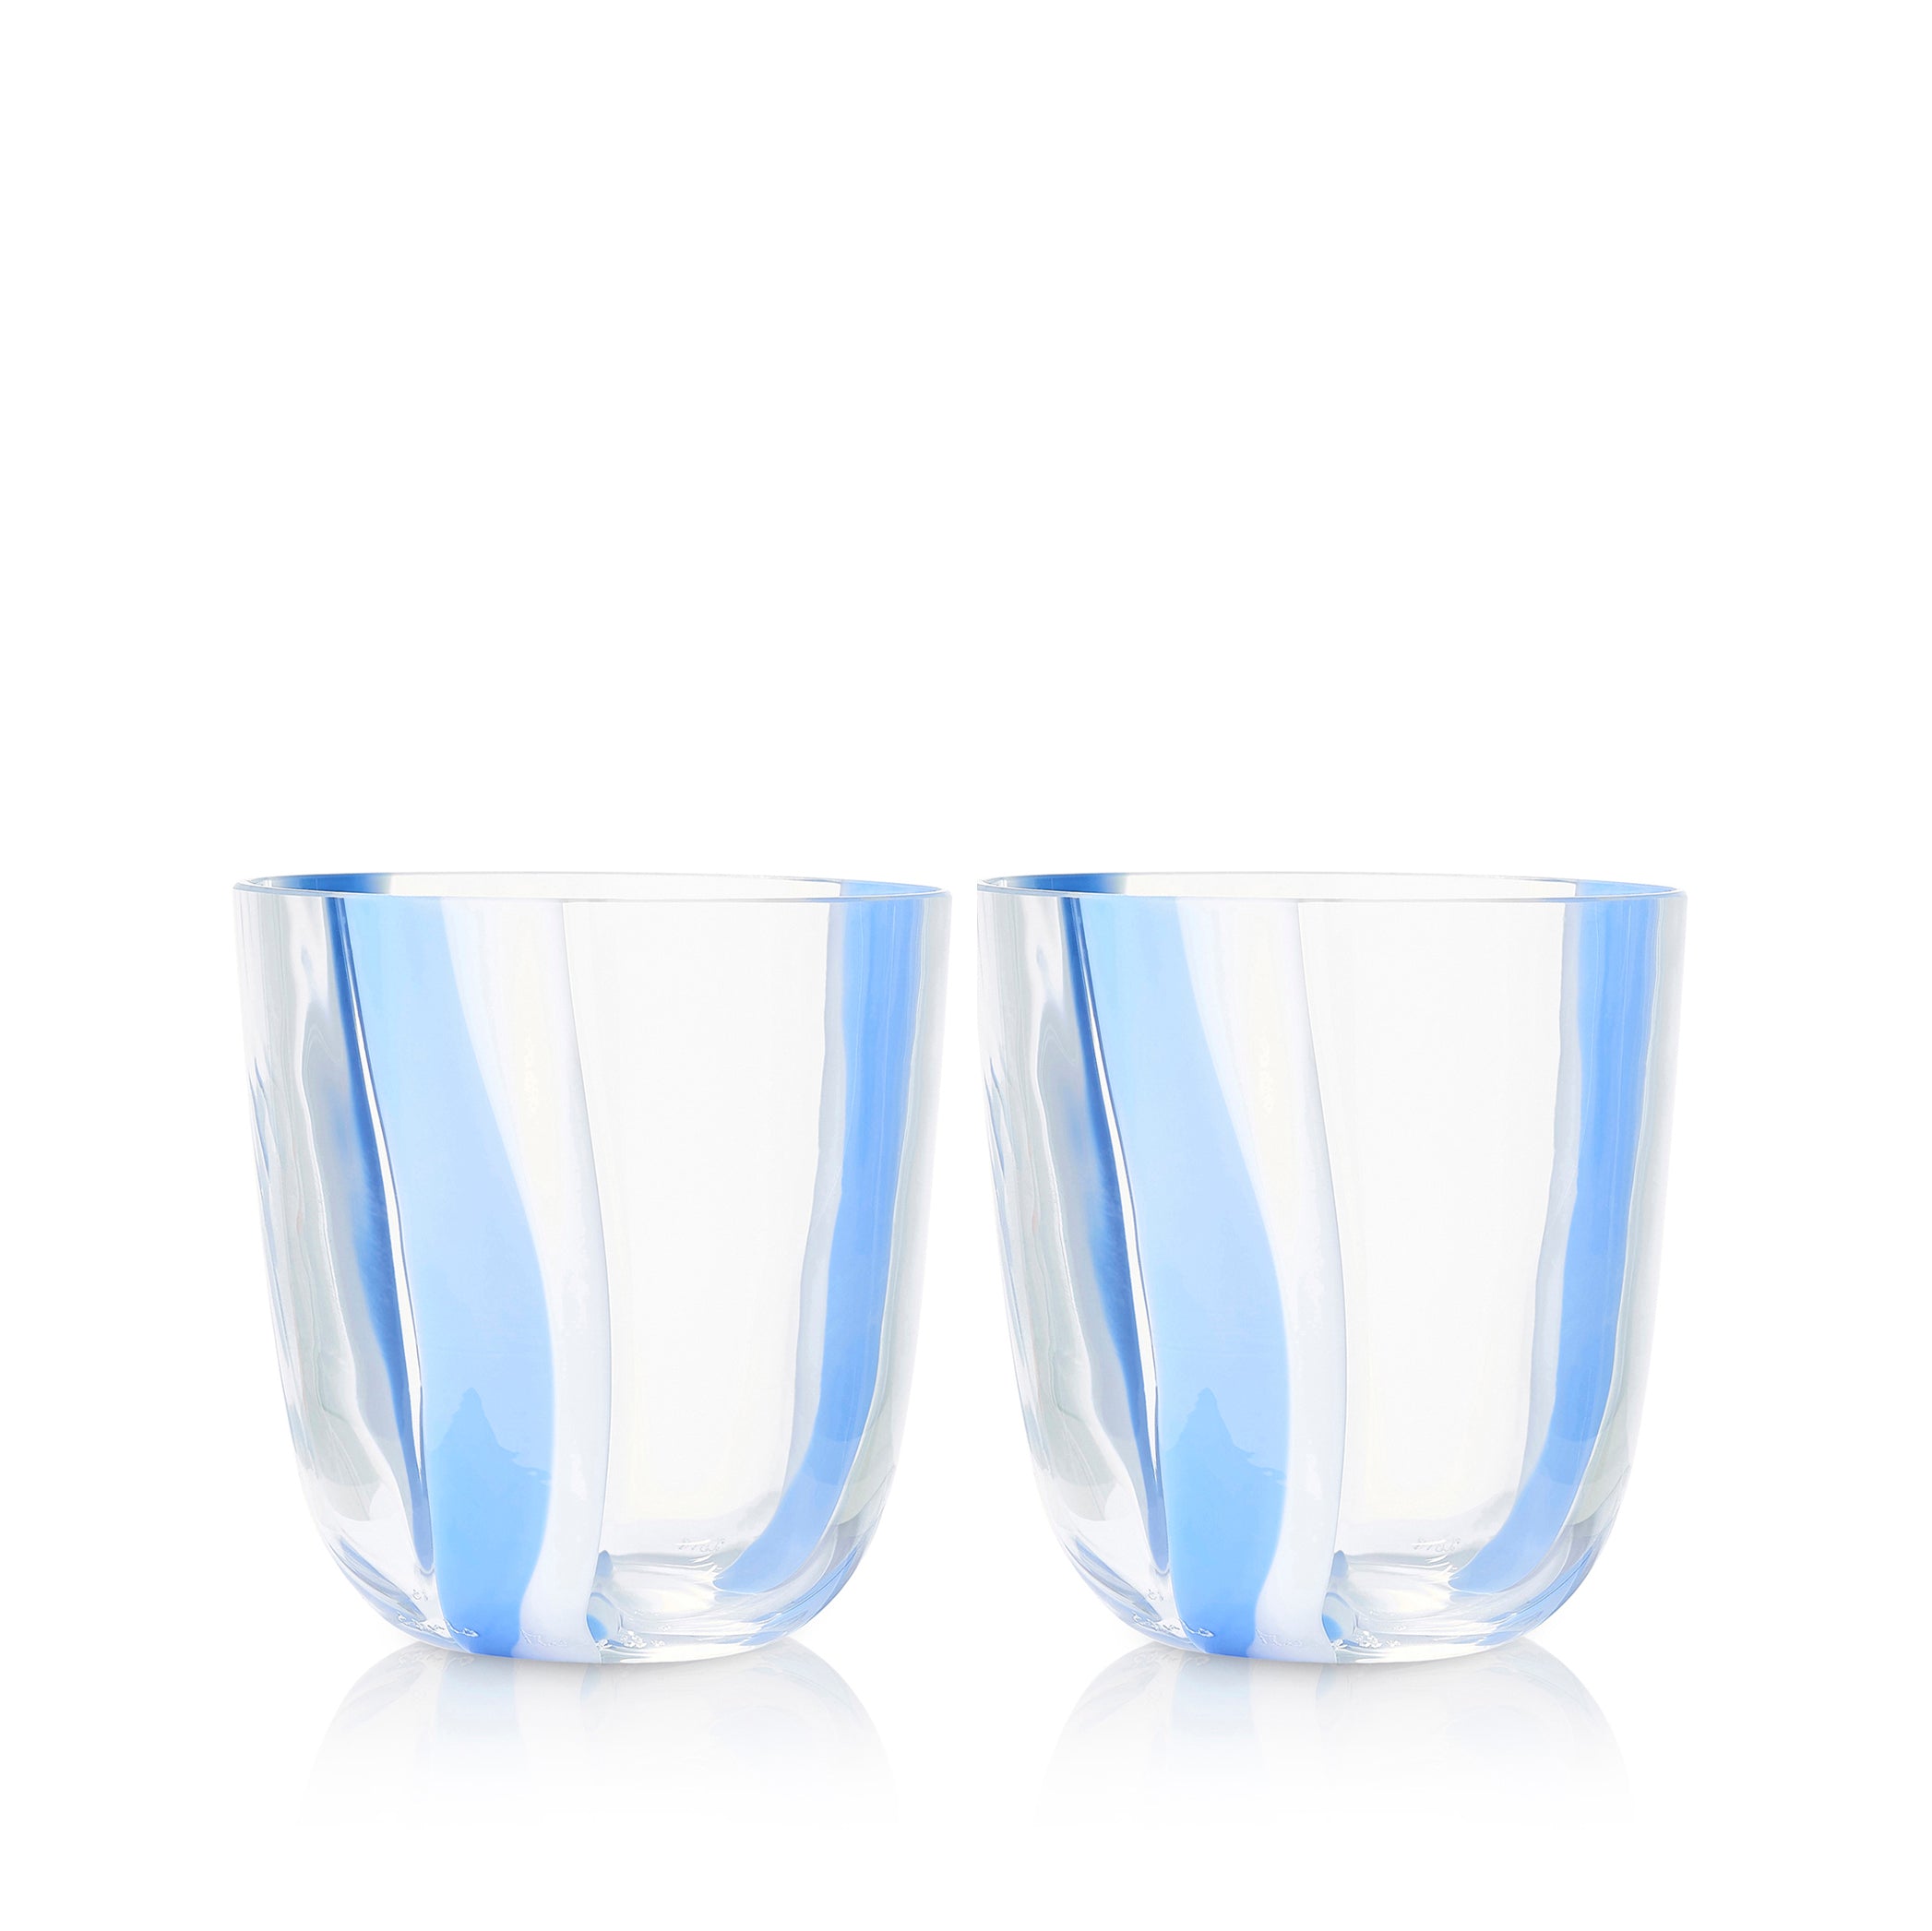 Set of Two Handblown Stripe Glass Tumblers in Turquoise Blue & White, 8.5cm